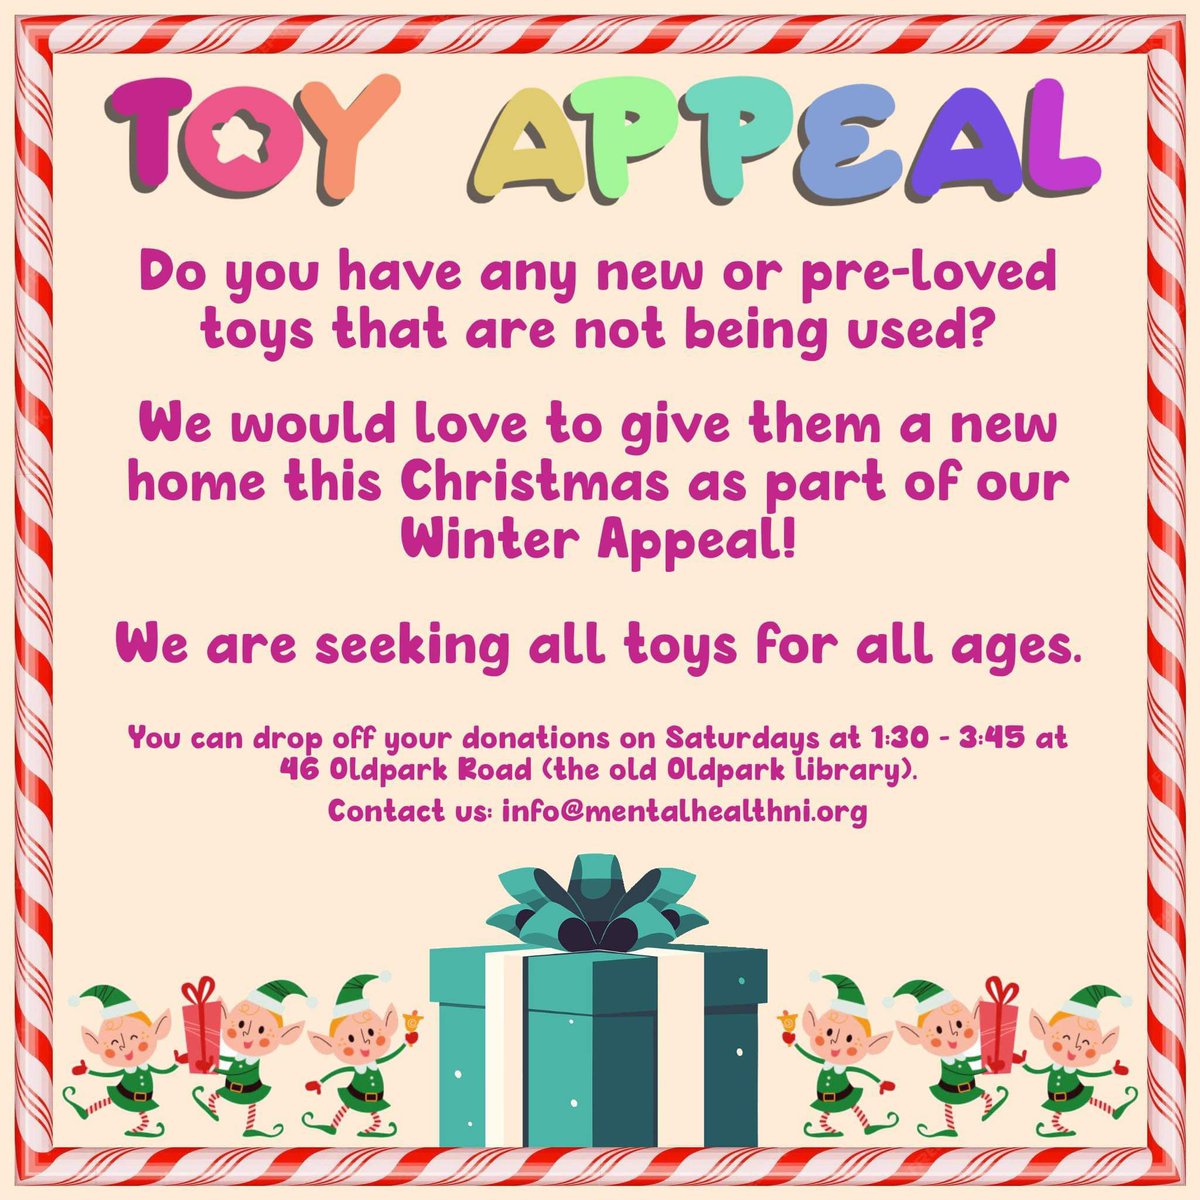 We are running our toy appeal for new and preloved toys 🧸 drop off info below. Please RT.